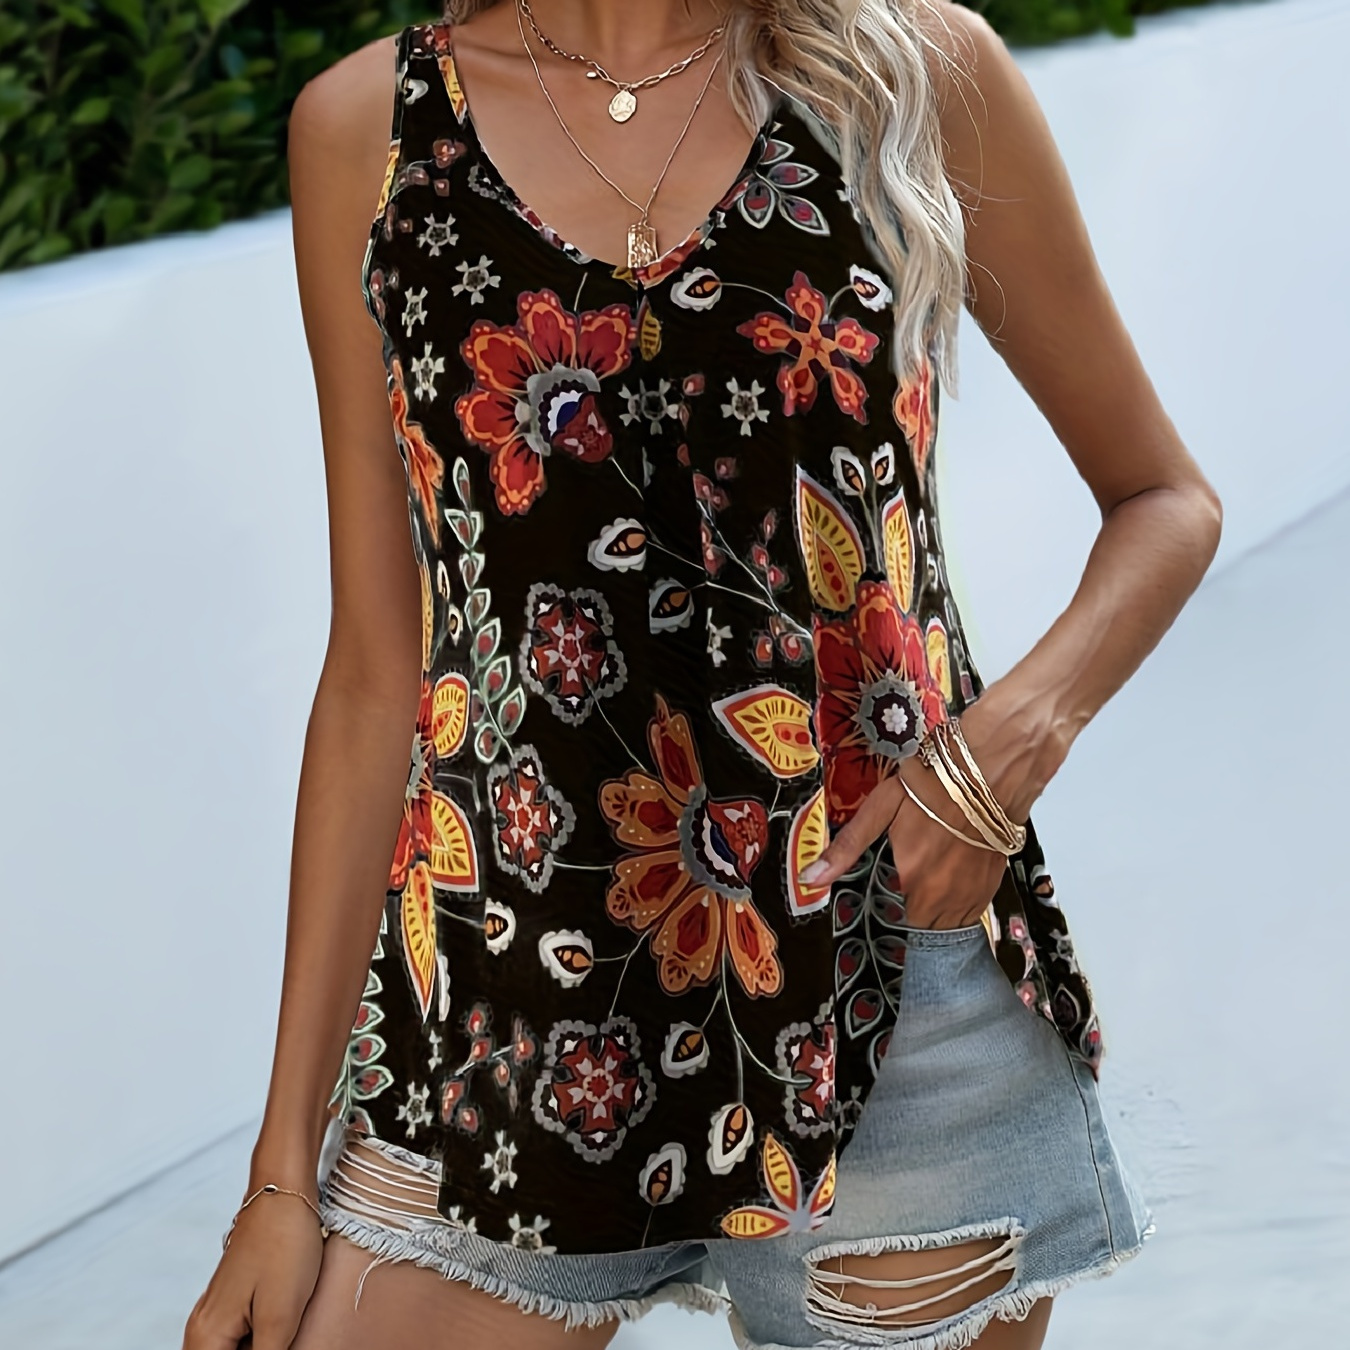 

Floral Print Tank Top, Casual V Neck Summer Sleeveless Top, Women's Clothing